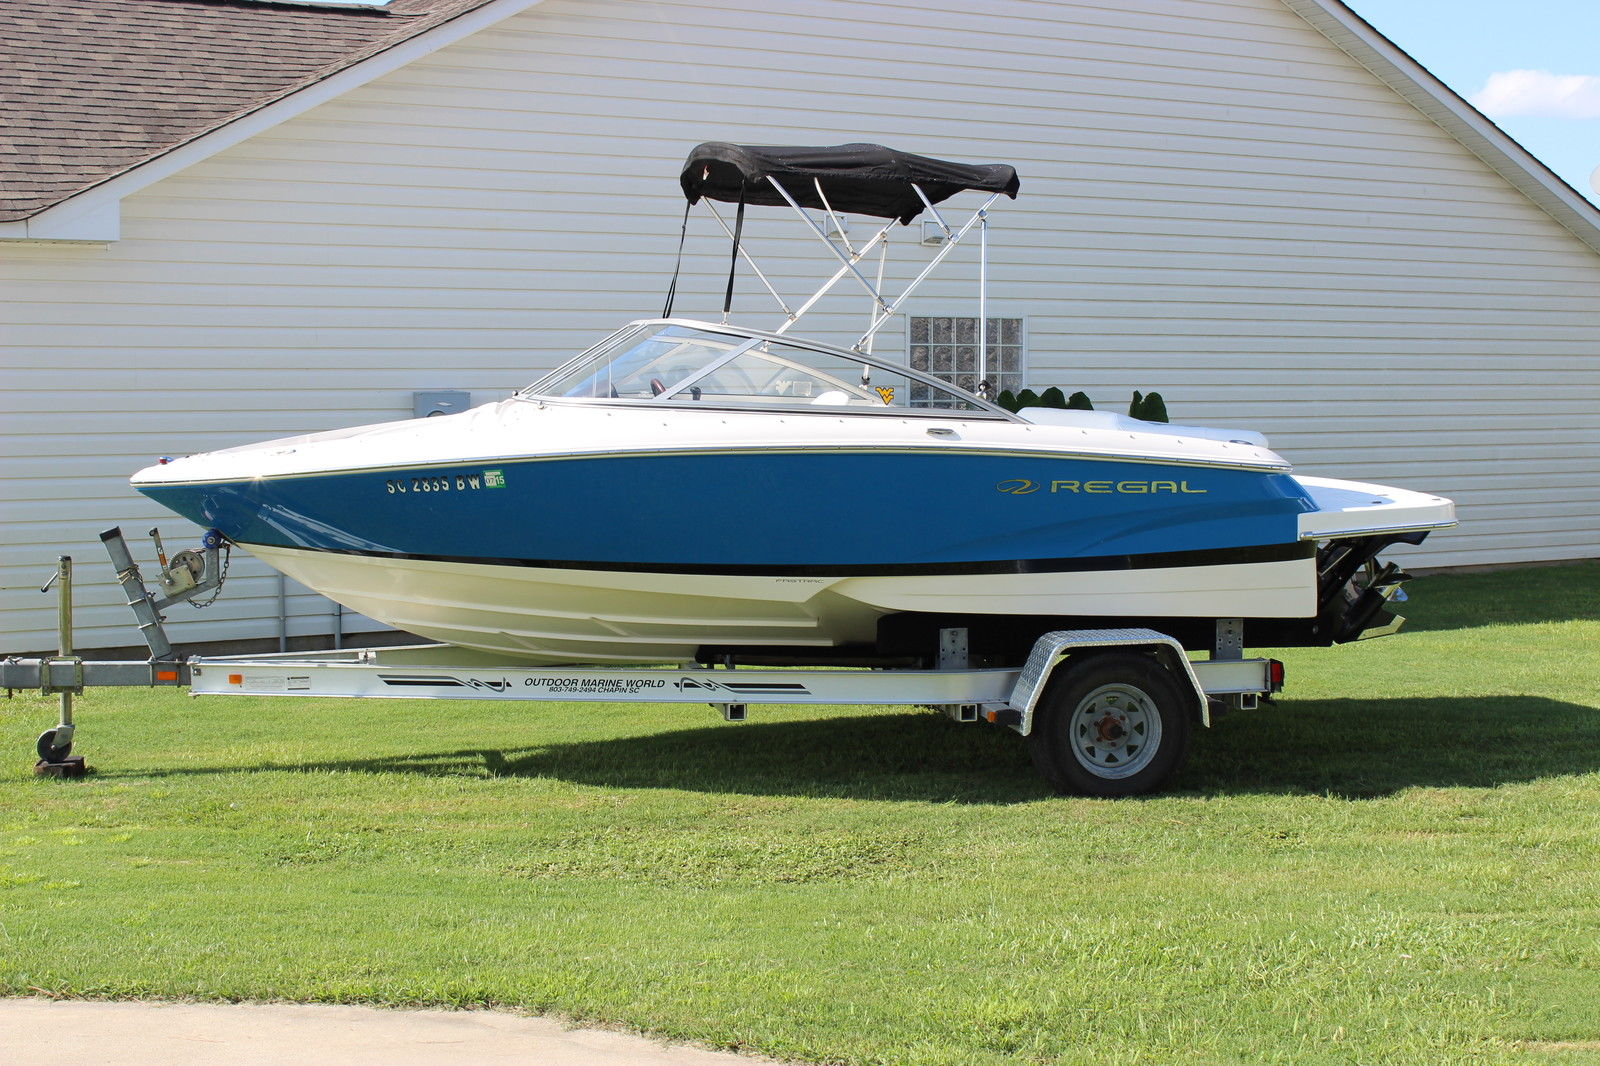 Regal 1900 2006 for sale for $14,700 - Boats-from-USA.com